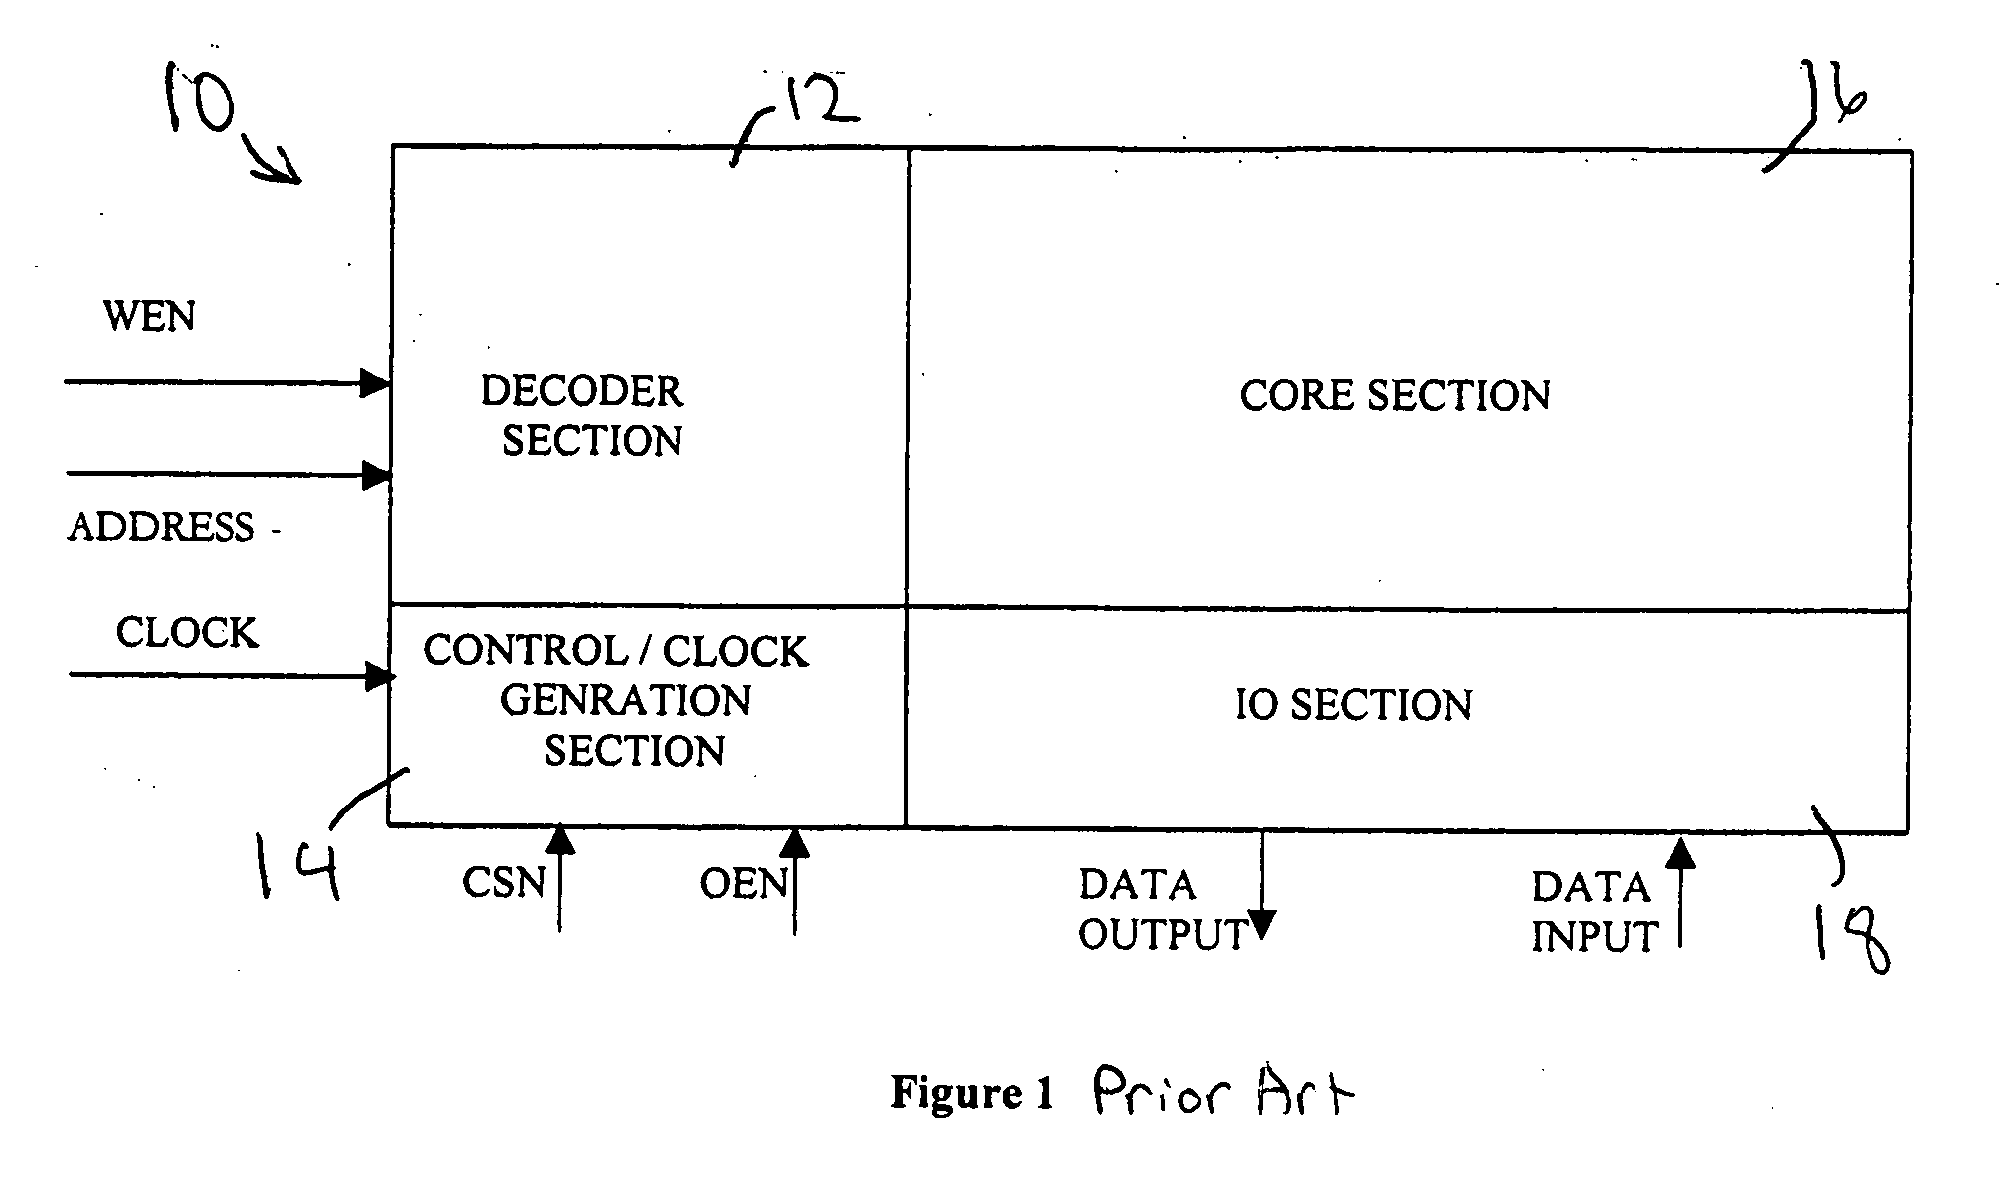 Area efficient memory architecture with decoder self test and debug capability